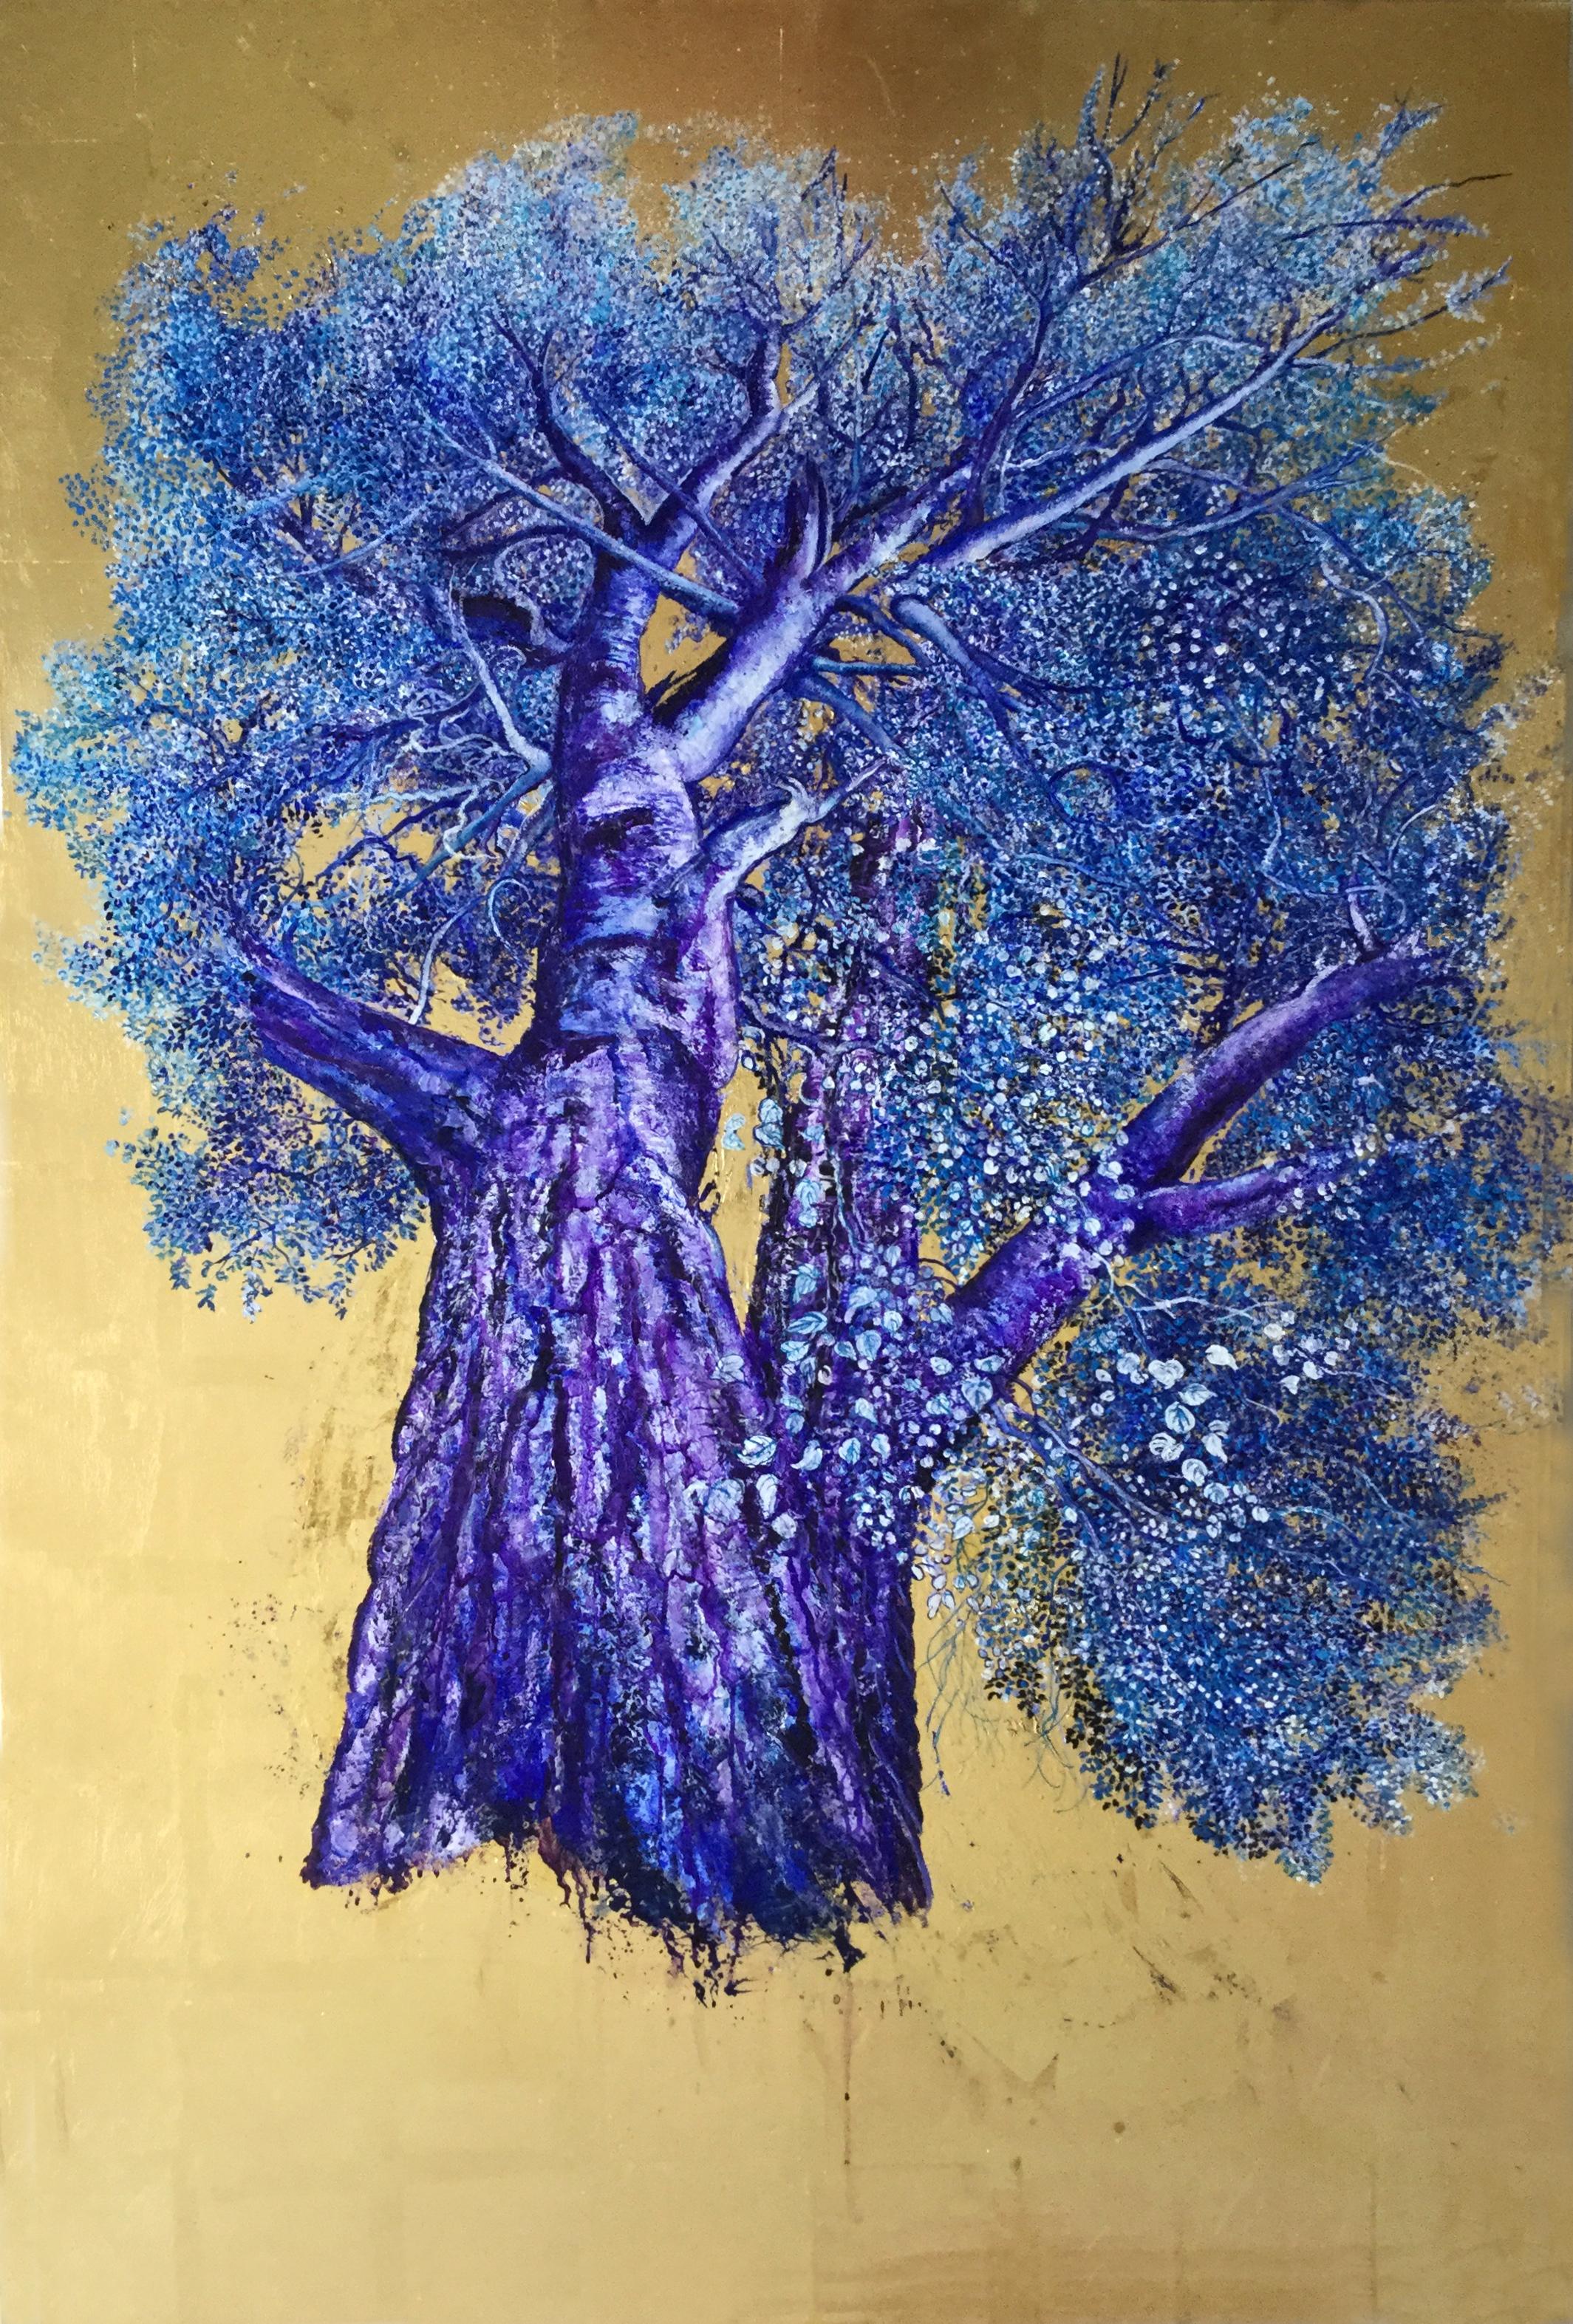 Anastasia Gklava Landscape Painting - Mesmerizing, Oil on Canvas with Gold Leaf Painting, Powerful Violet & Blue Tree 